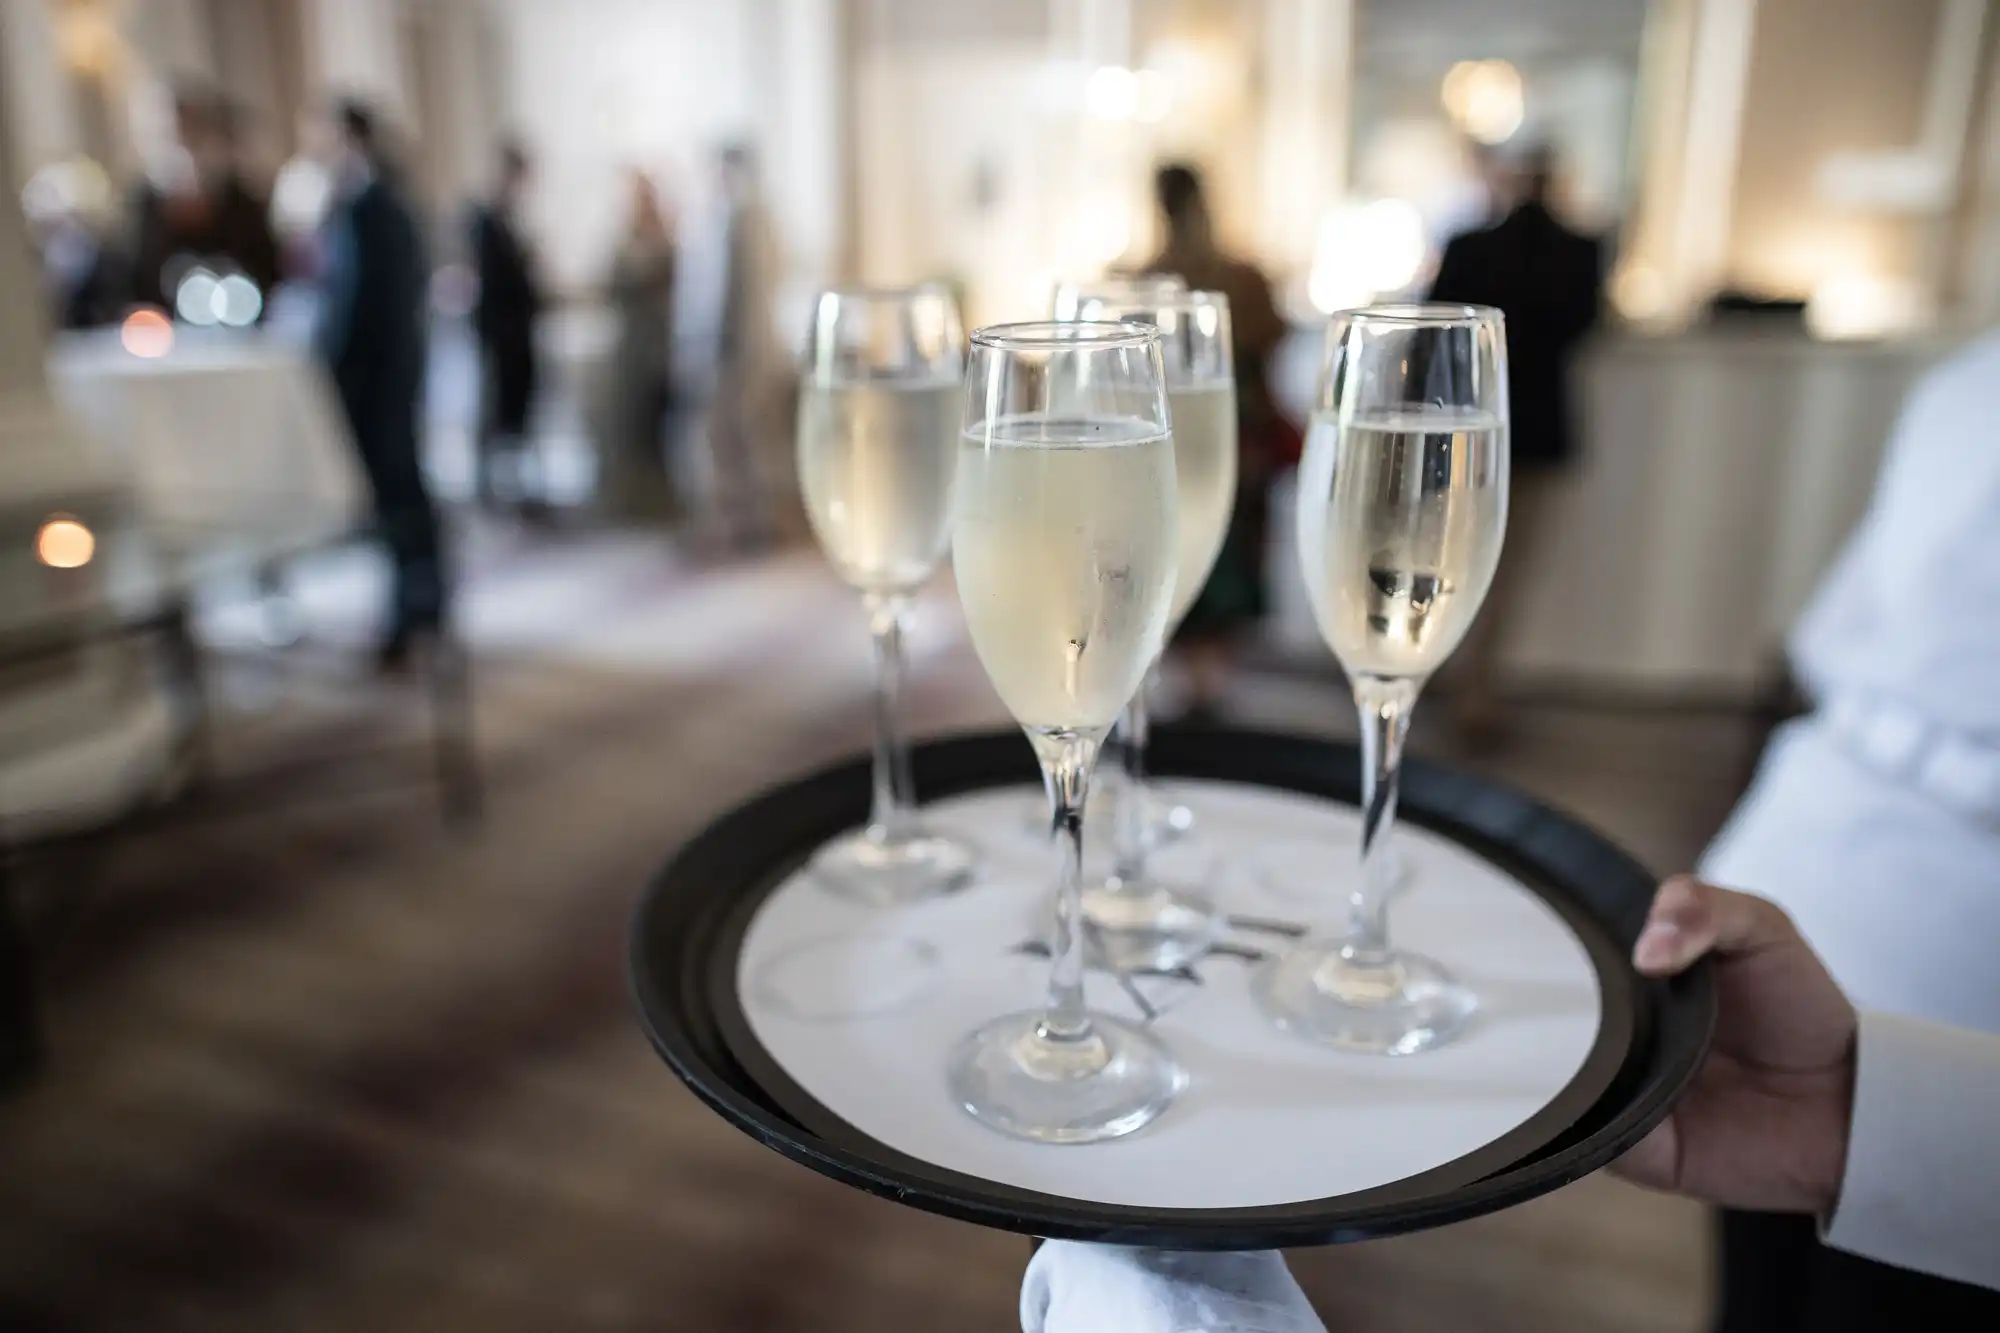 Server holding a tray of champagne glasses at a social gathering in an elegant room with guests in the background.